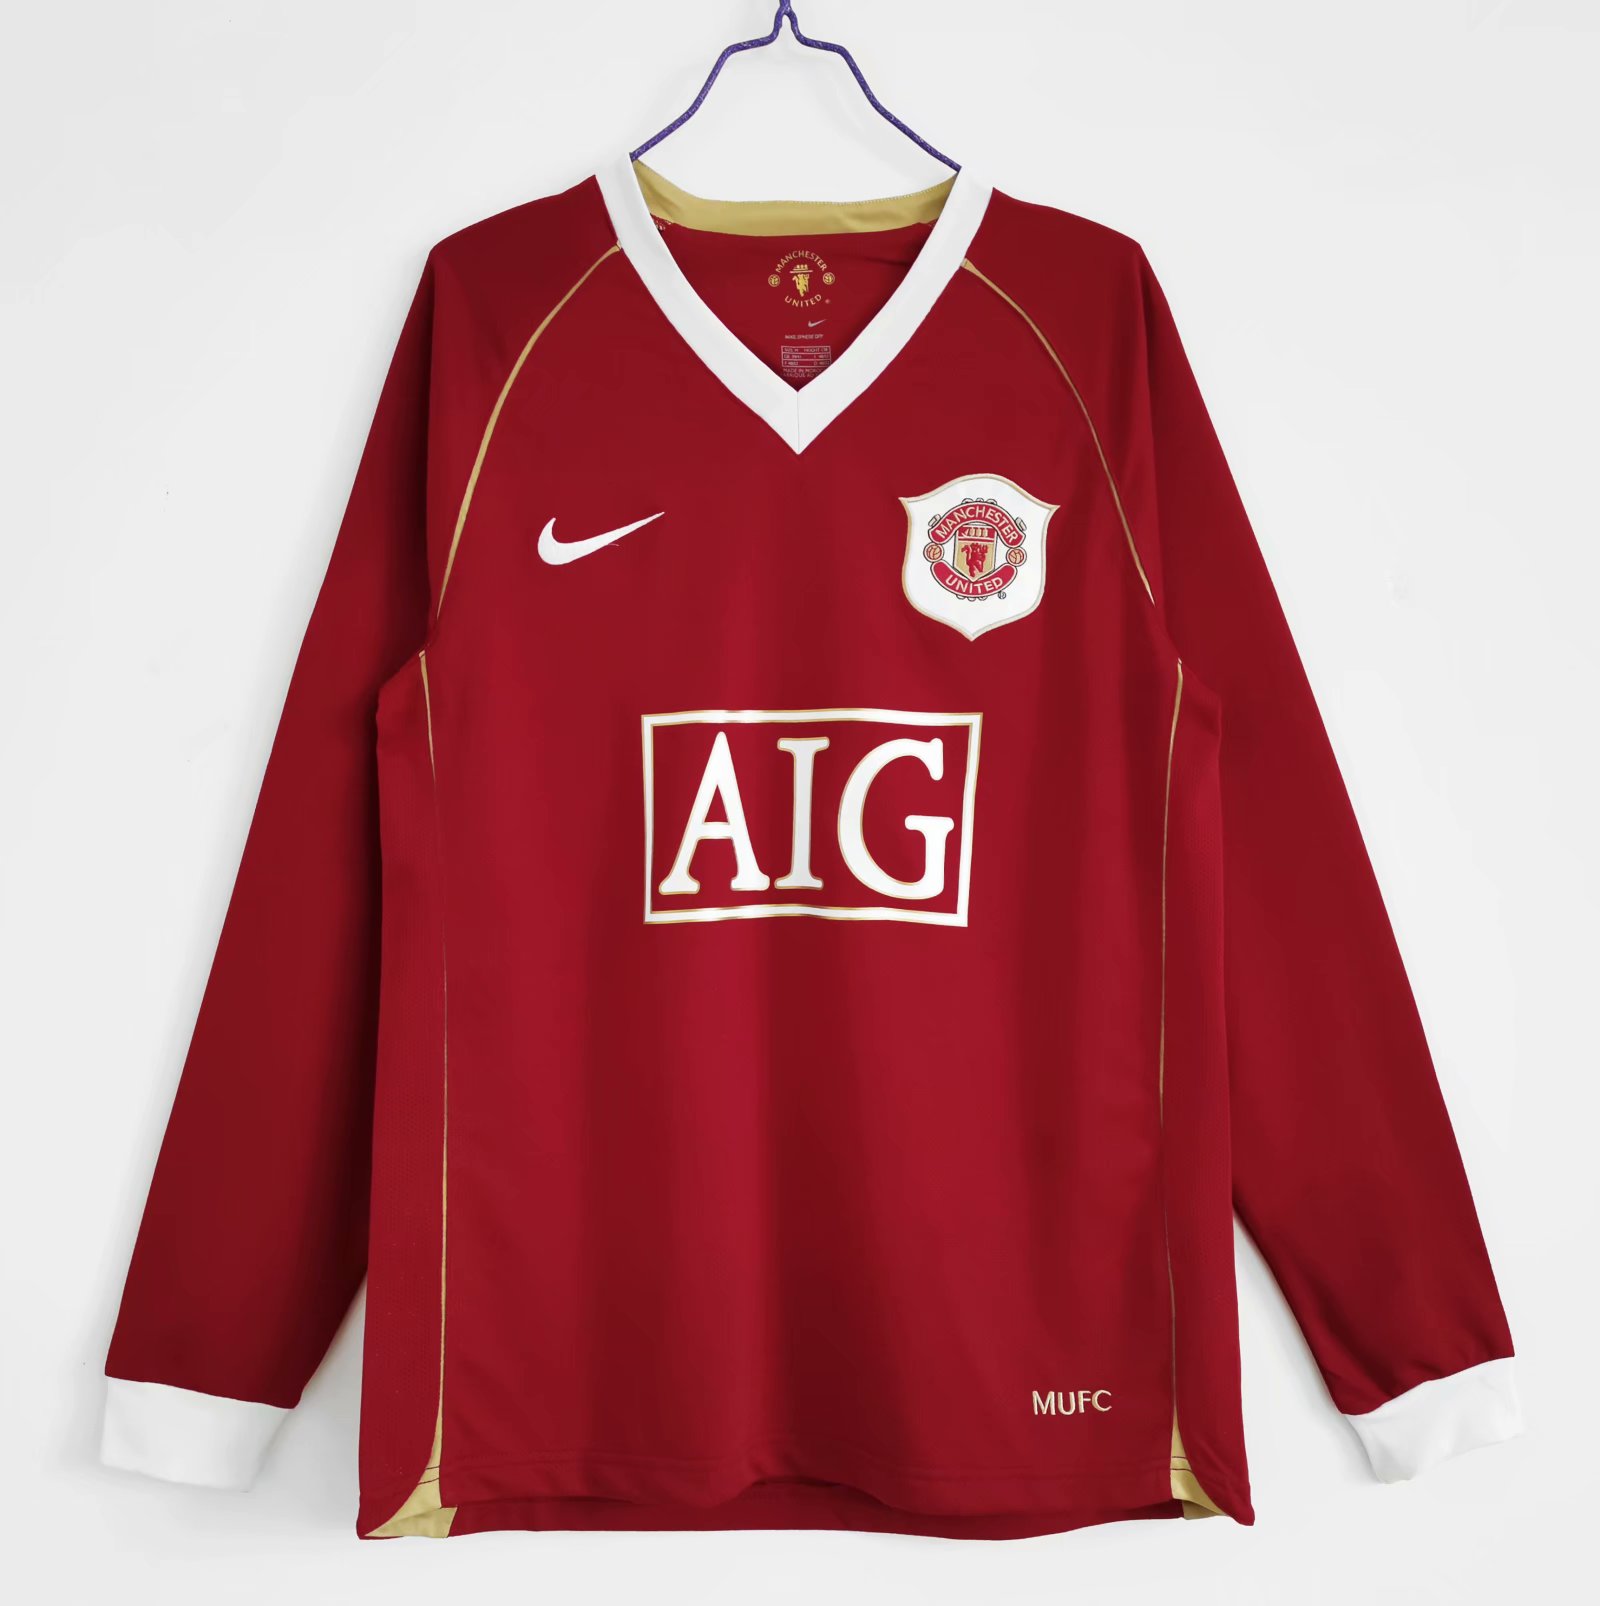 2006-2007 Manchester United away long